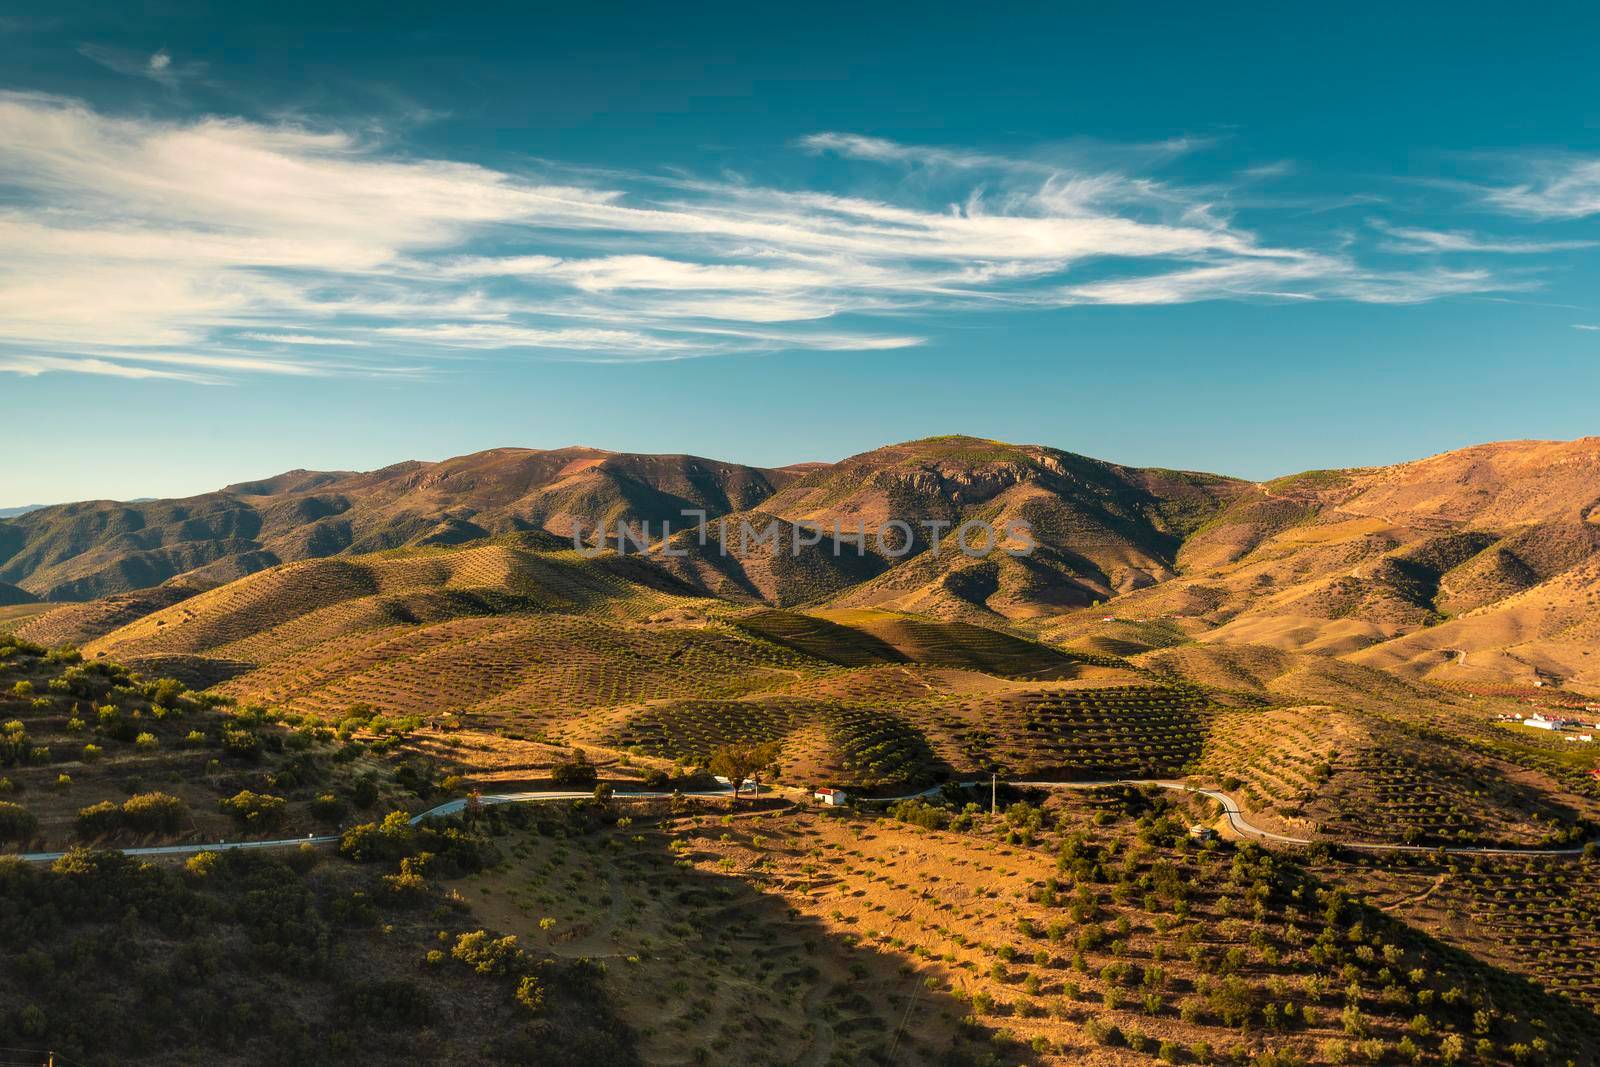 Douro Montains, Portugal by Iko